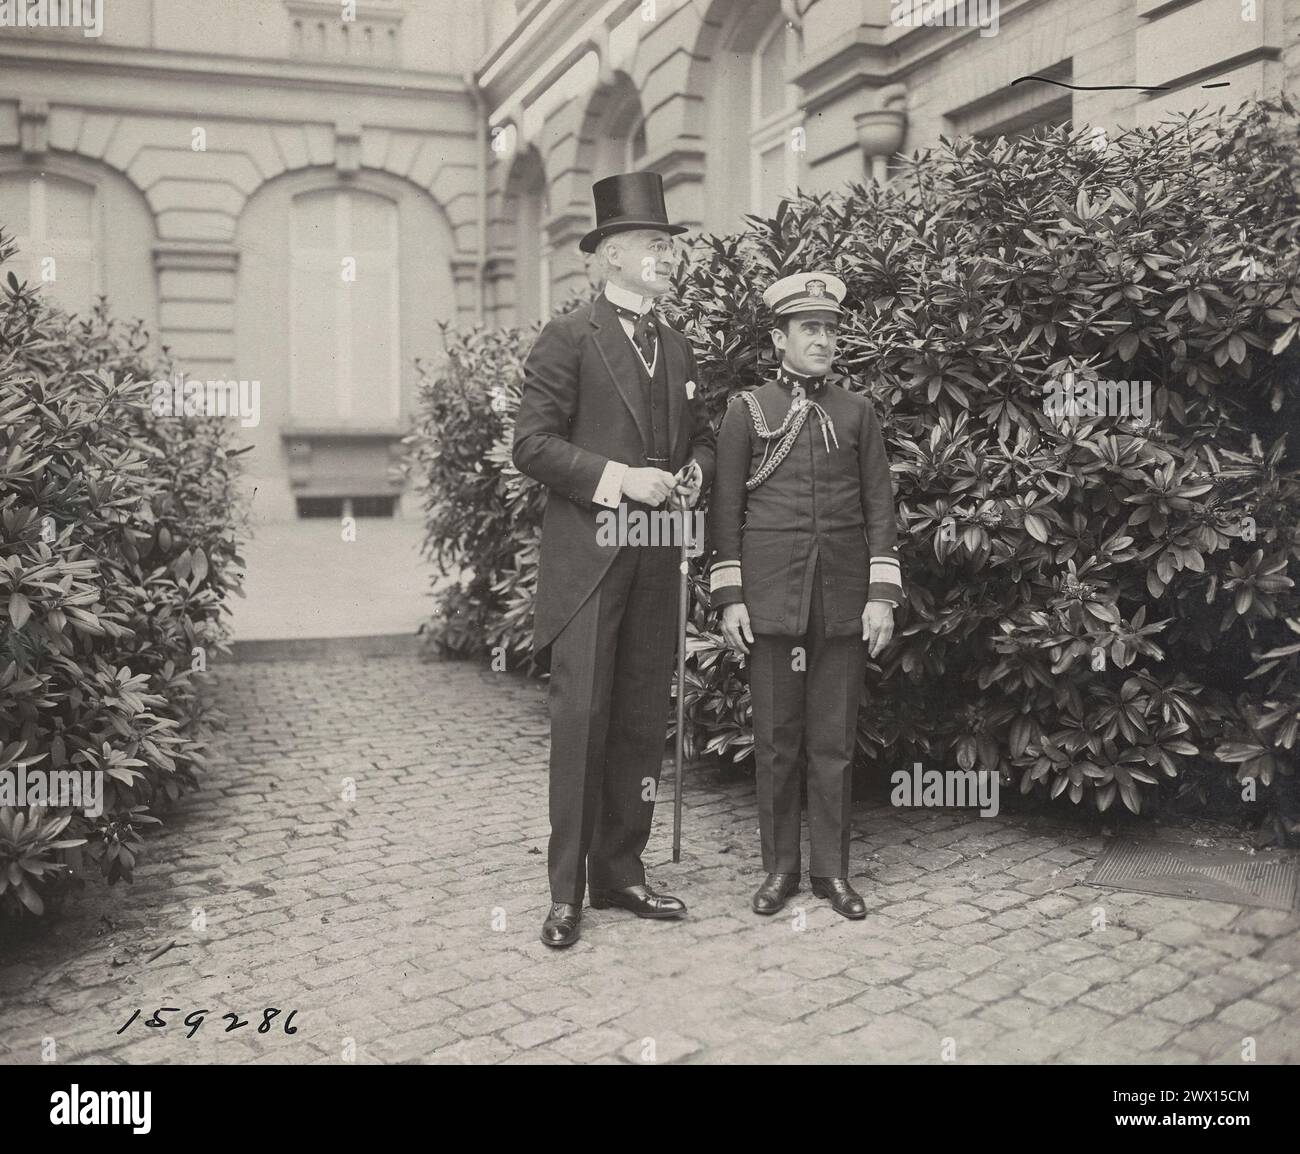 Mr. Bernard Baruch and Rear Admiral Cary T. Grayson, aide and medical advisor to President Wilson in front of the King's Palace. Brussels, Belgium ca. June 1919 Stock Photo